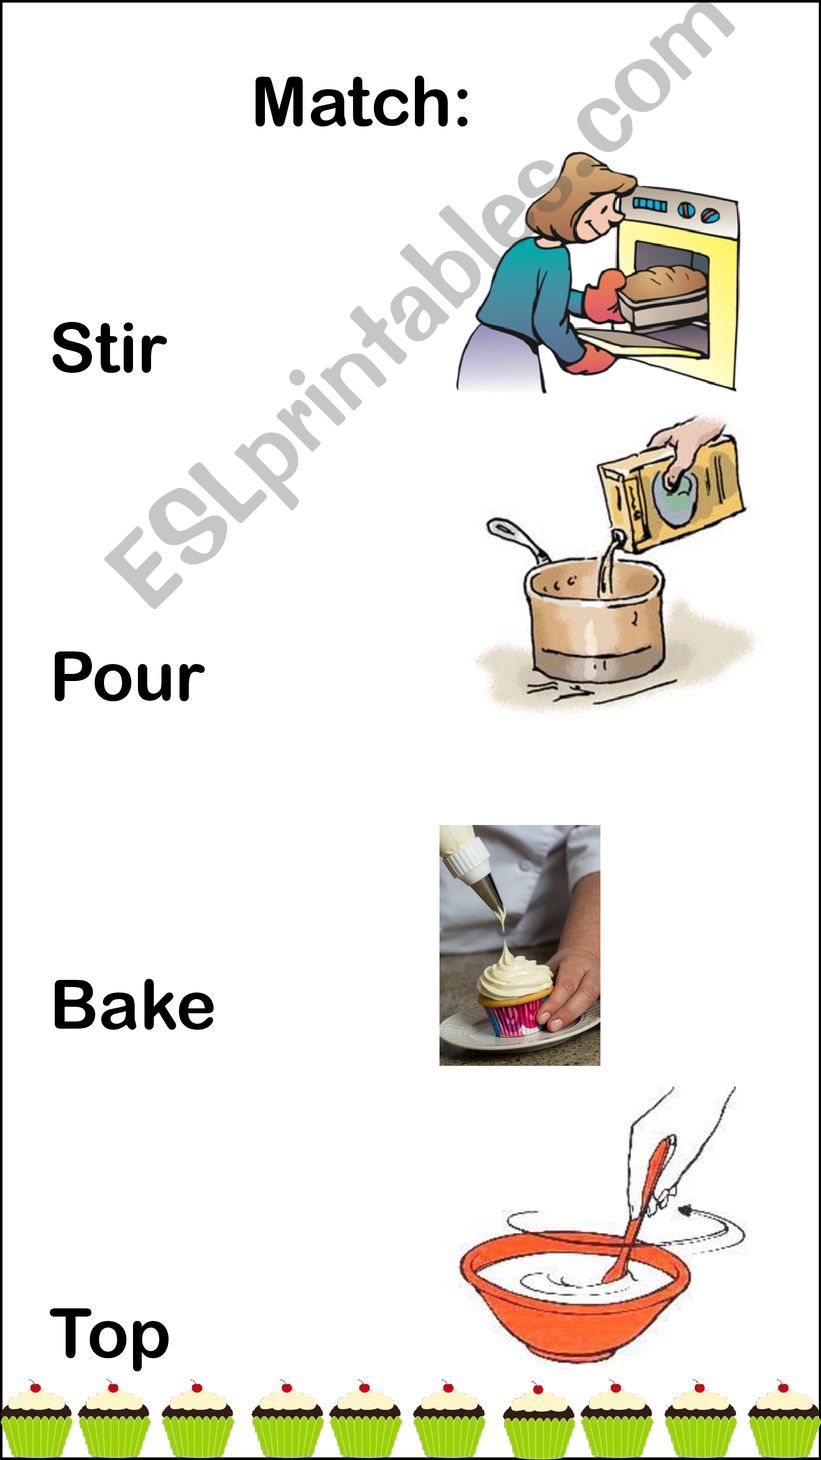 Cupcake cooking class booklet powerpoint